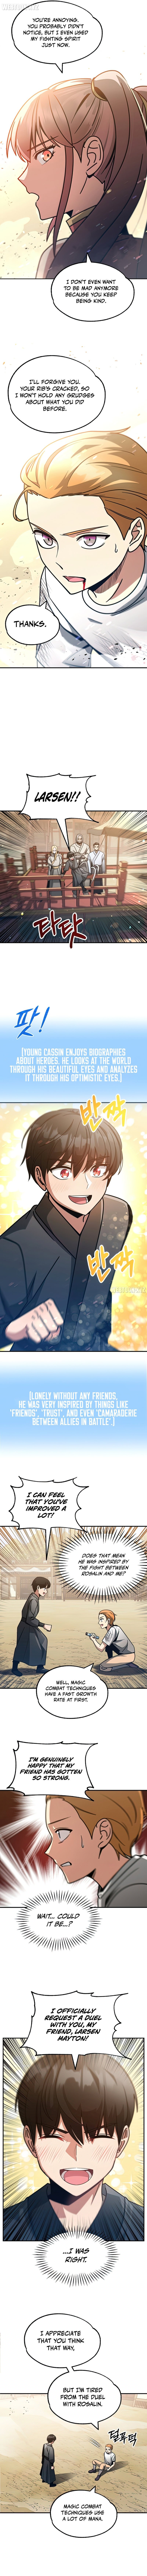 youngest-scion-of-the-mages-chap-31-5